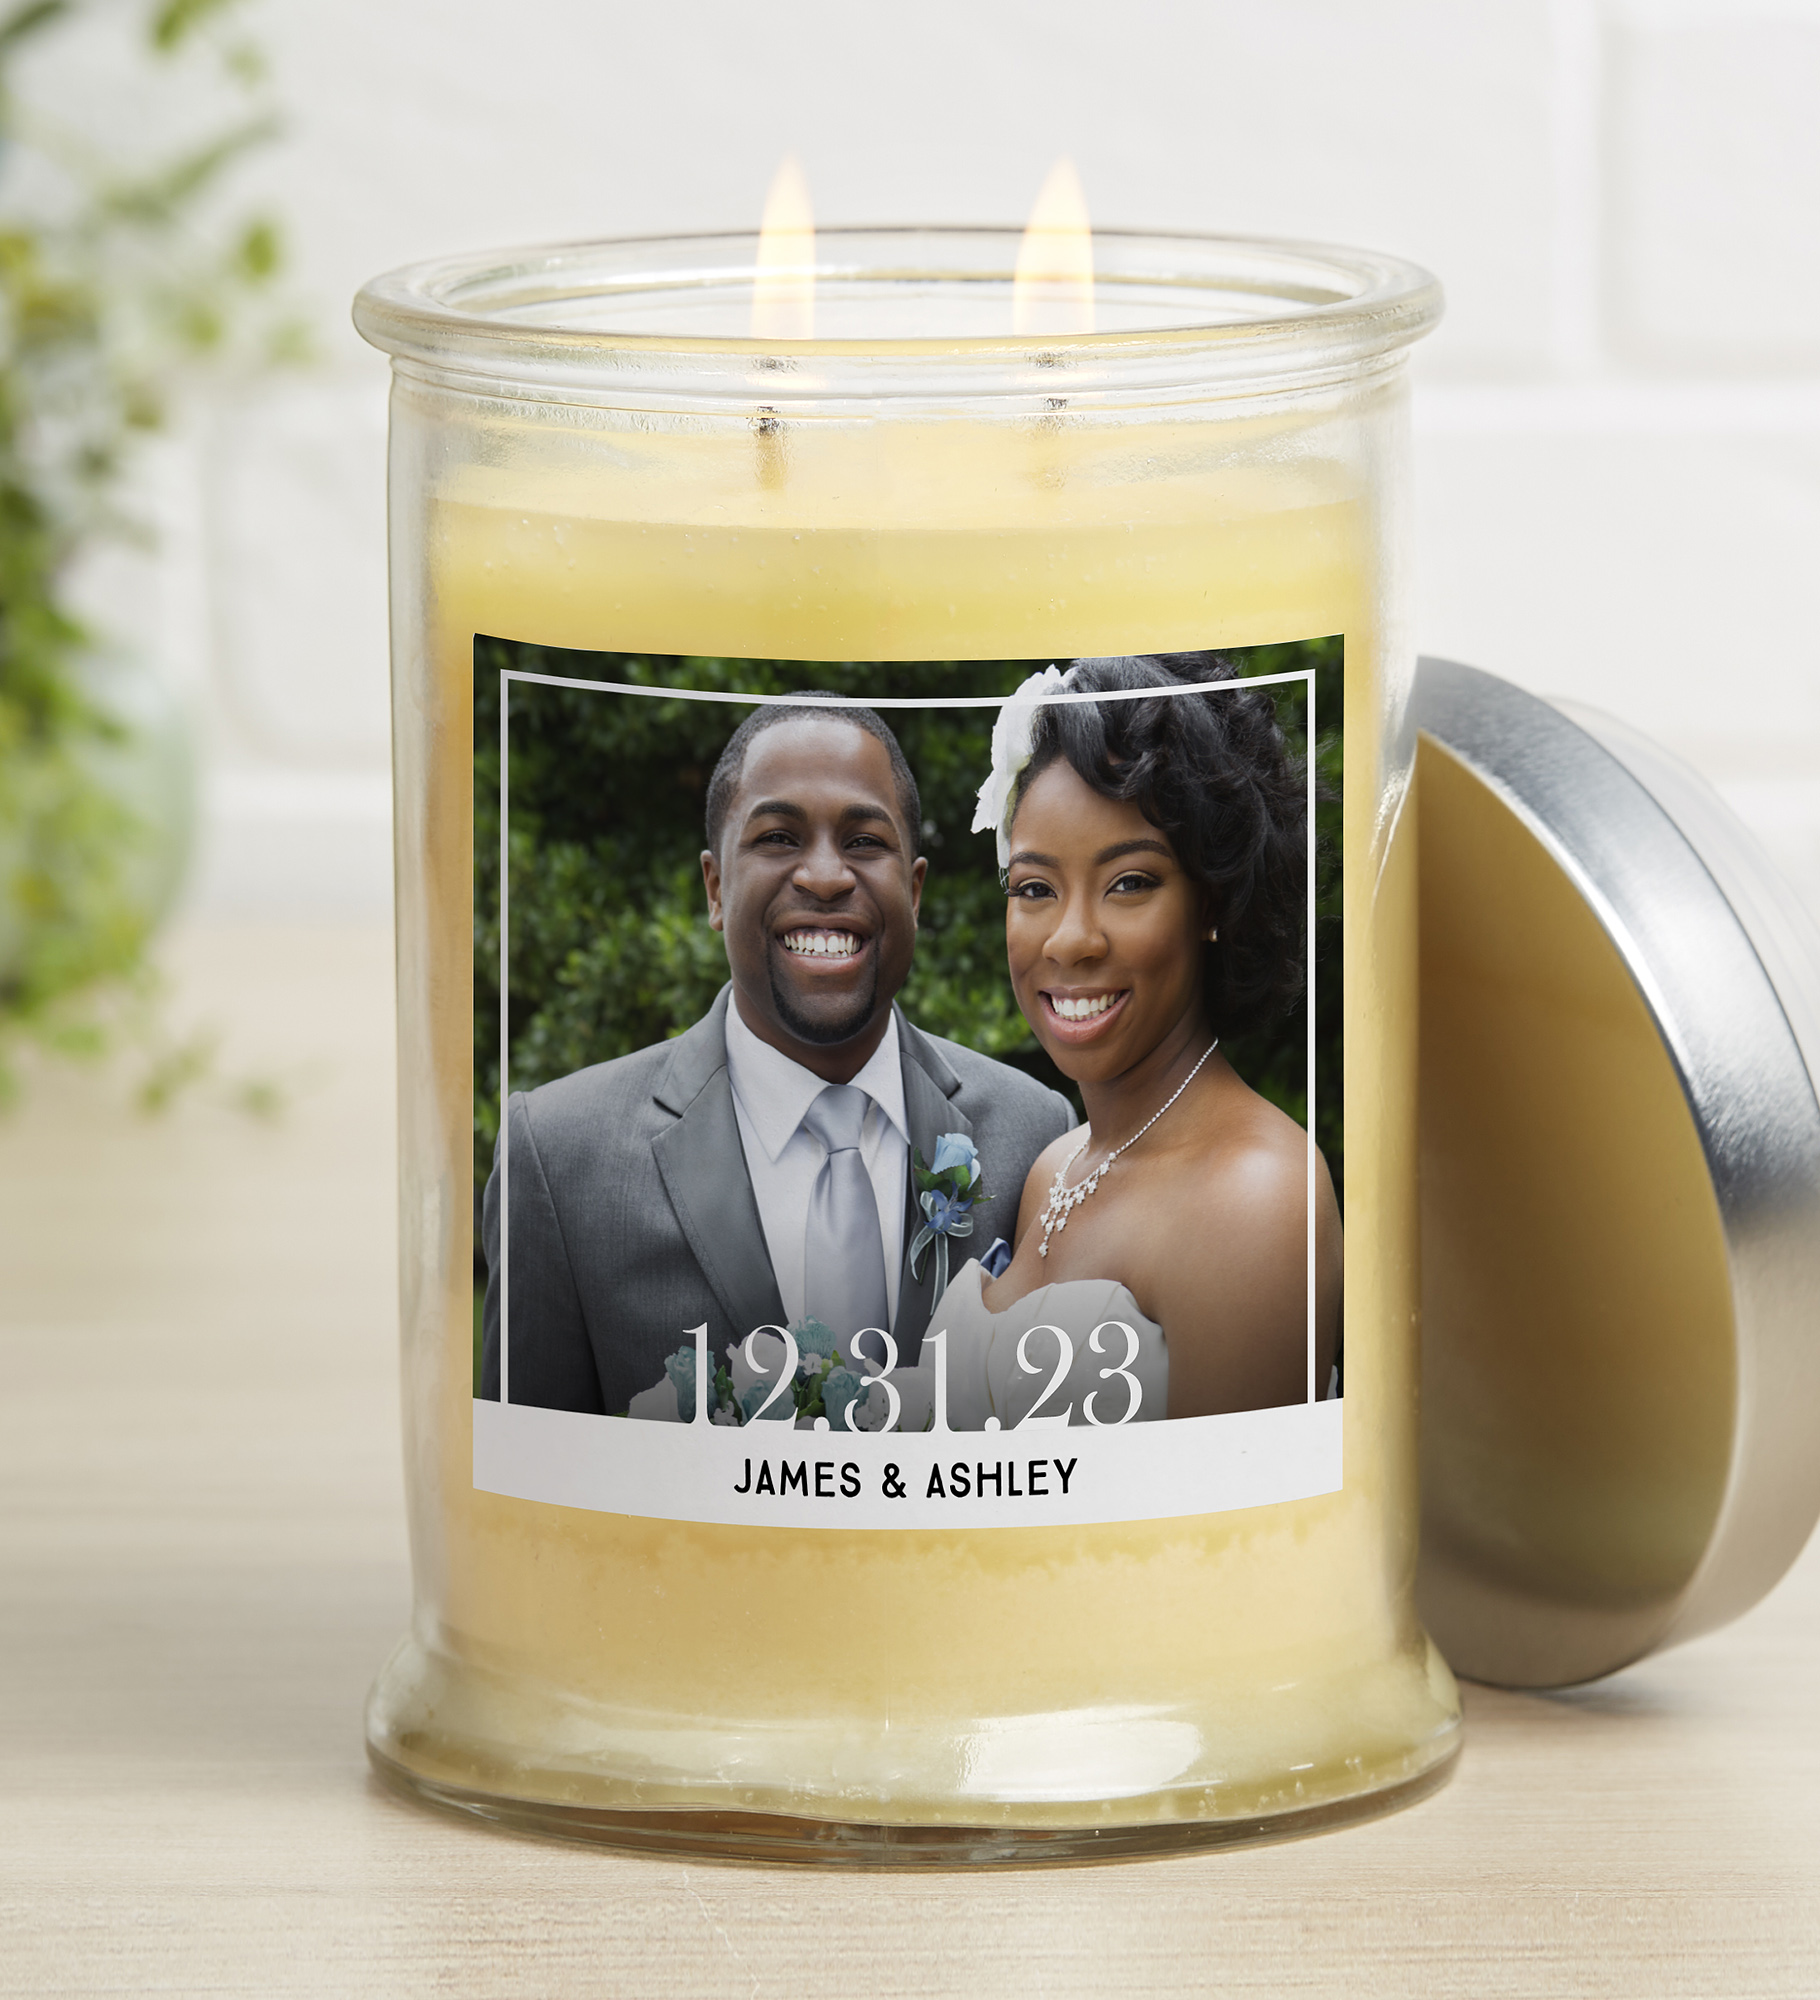 Our Wedding Photo Personalized Candle Jar